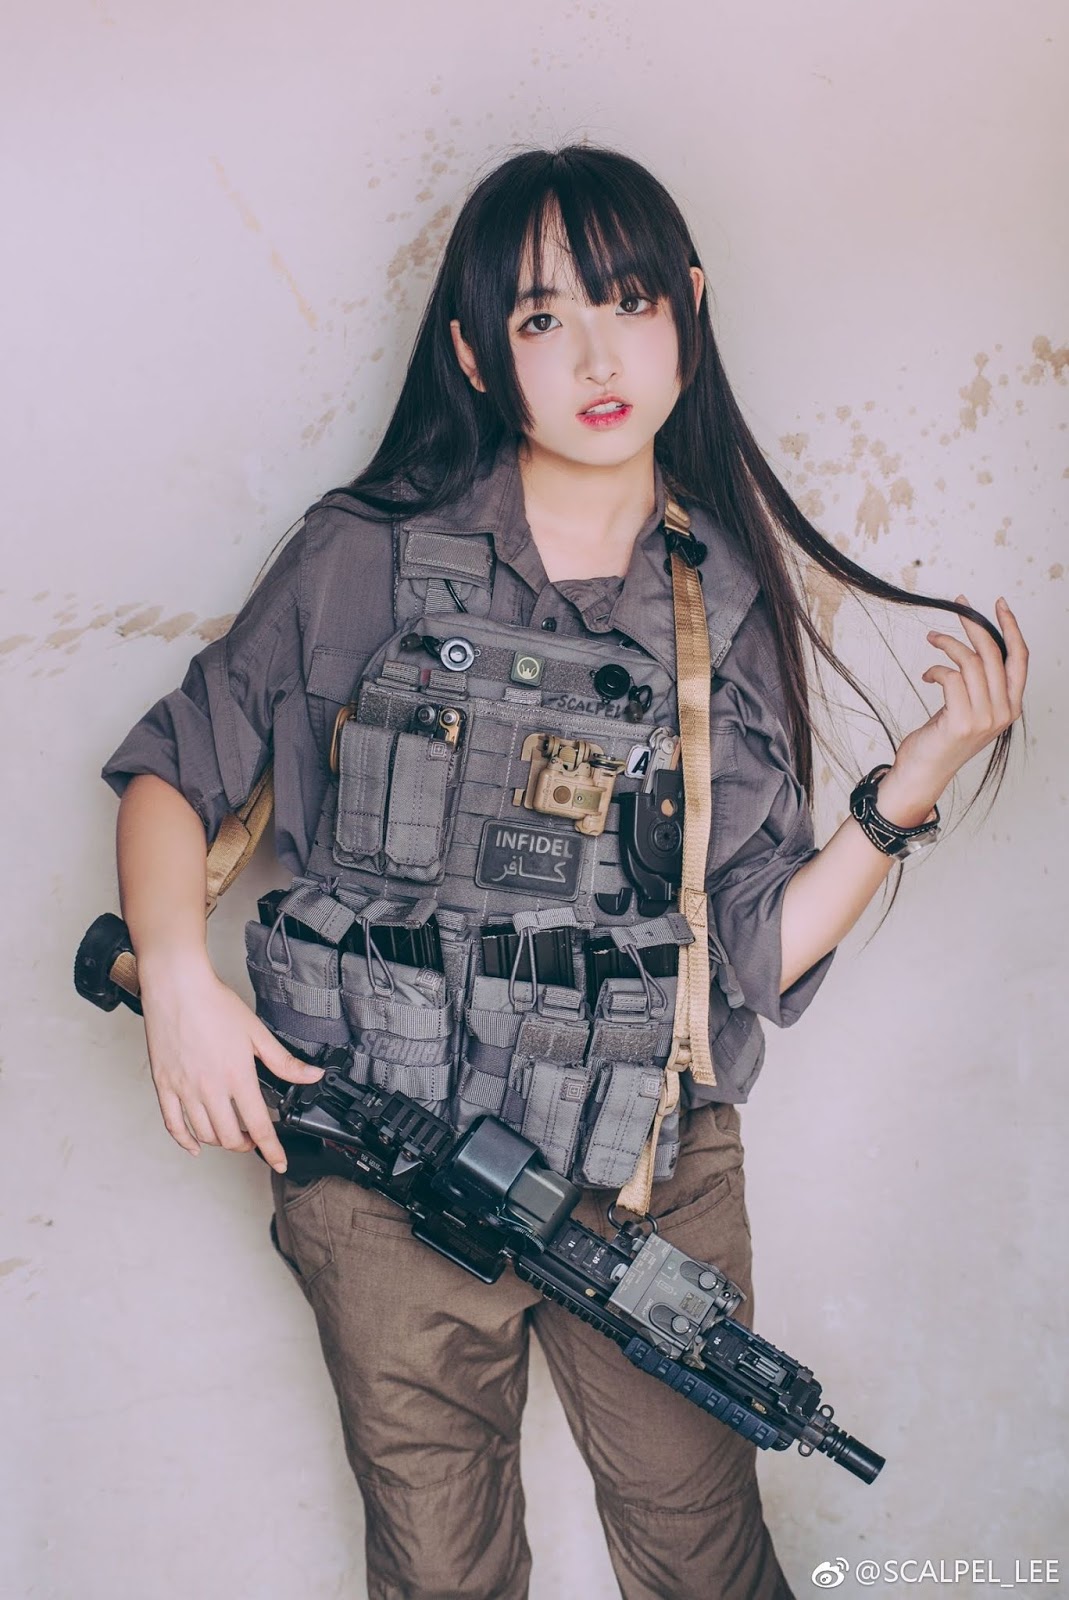 Amazing WTF Facts: Cute Asian Girls With Guns - Japanese Cosplay Armed ...